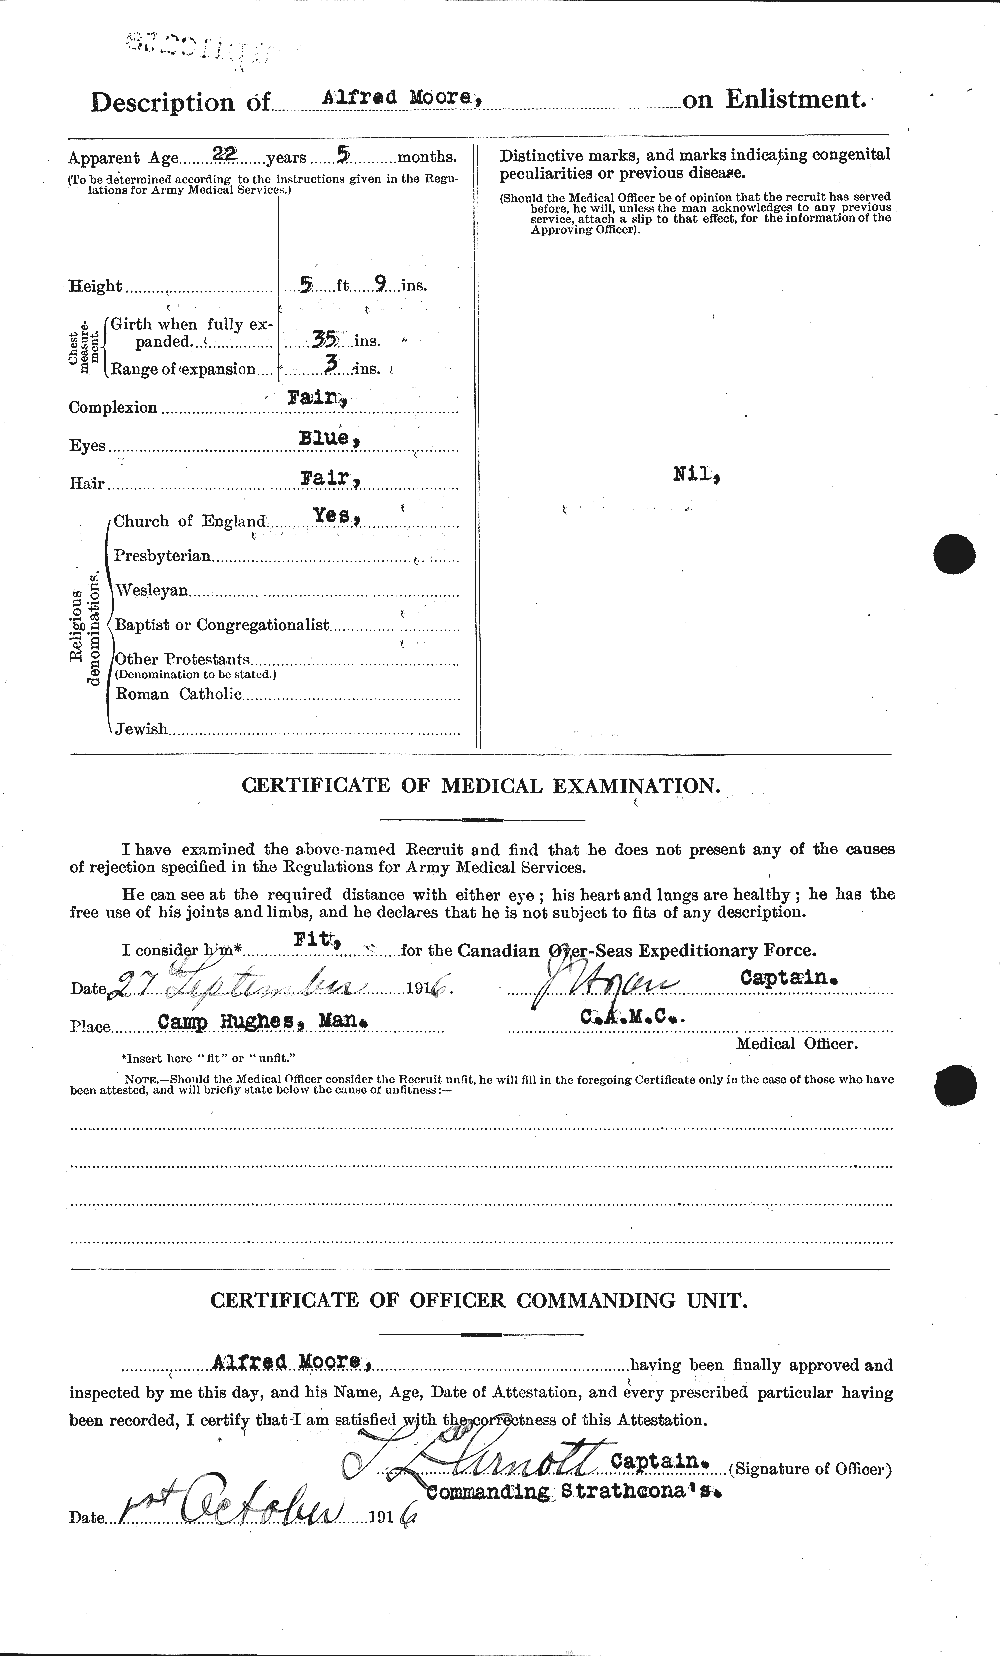 Personnel Records of the First World War - CEF 506379b